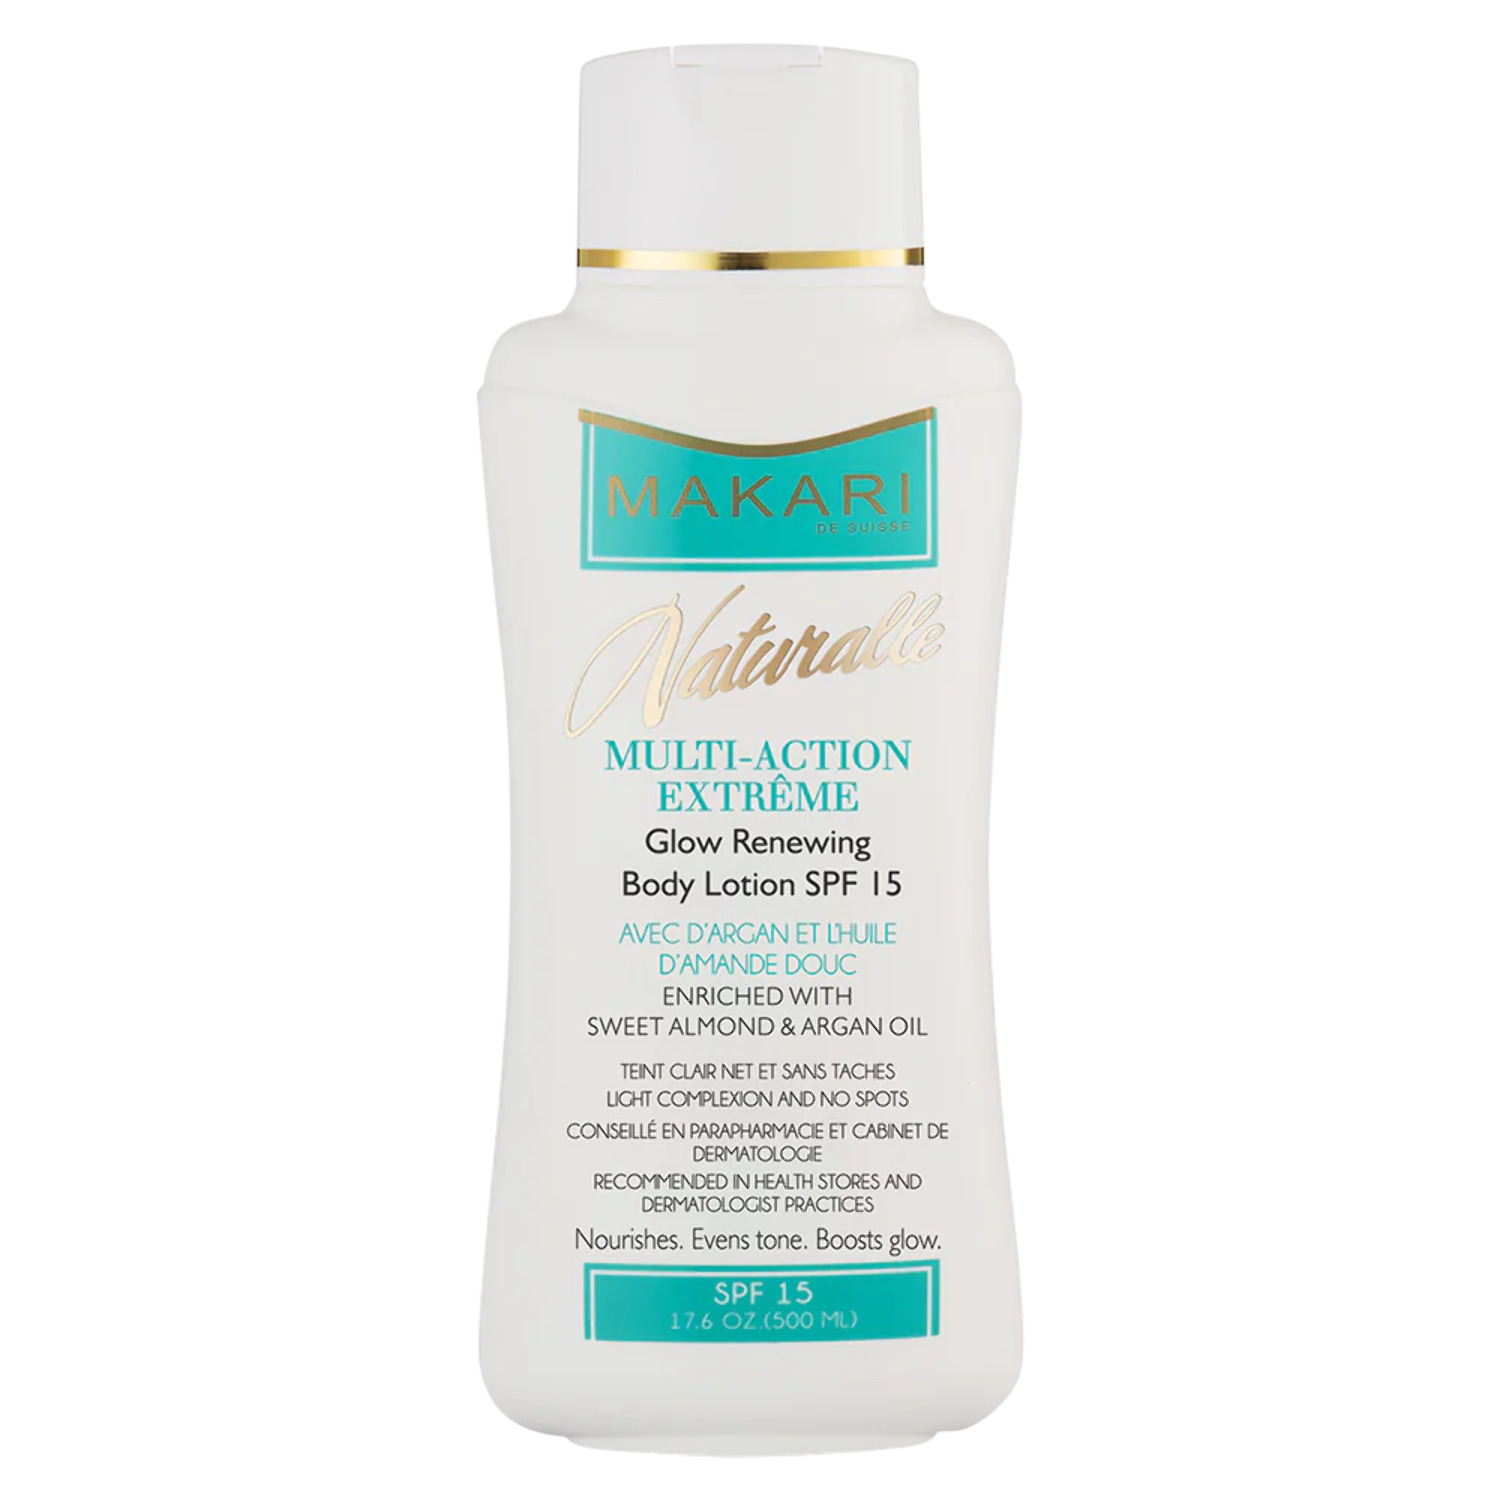 Makari Naturalle Multi-Action Extreme Body Lotion 17.6oz - Moisturizing Body Cream with Argan Oil & SPF 15 - Toning & Treatment for Dry Skin, Age Spots, Unevenness - image 1 of 3